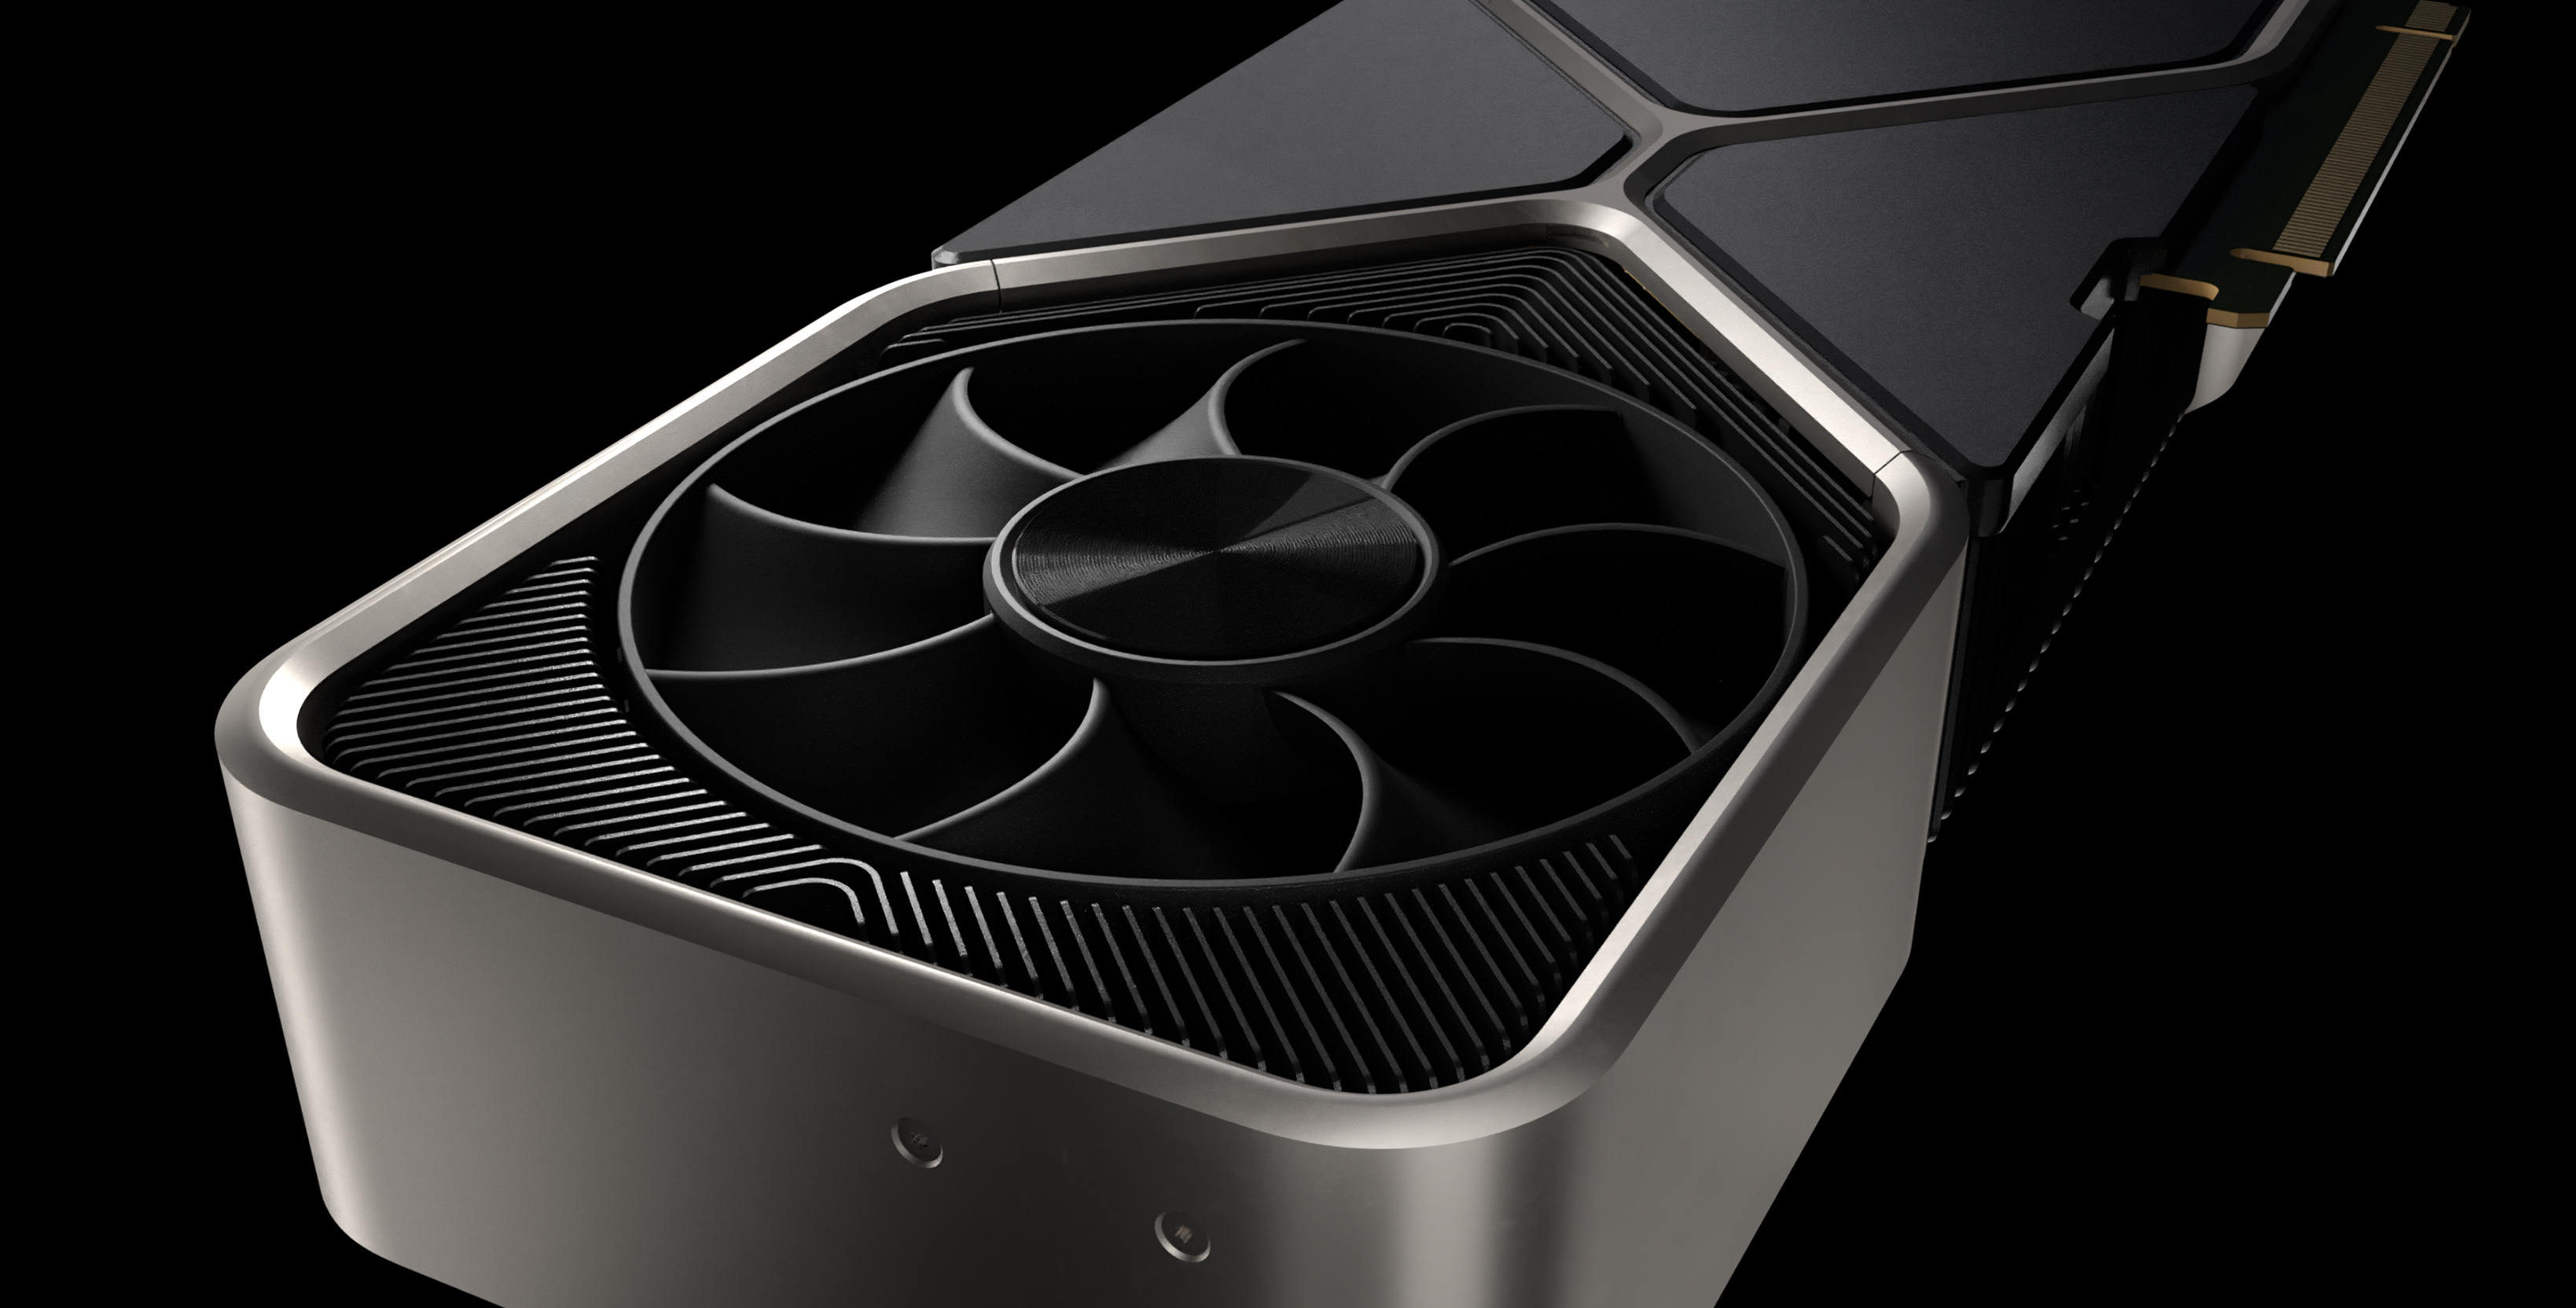 Alleged specifications of Nvidia RTX 4090, 4080, 4070 and 4060 Ada Lovelace  leak - Neowin